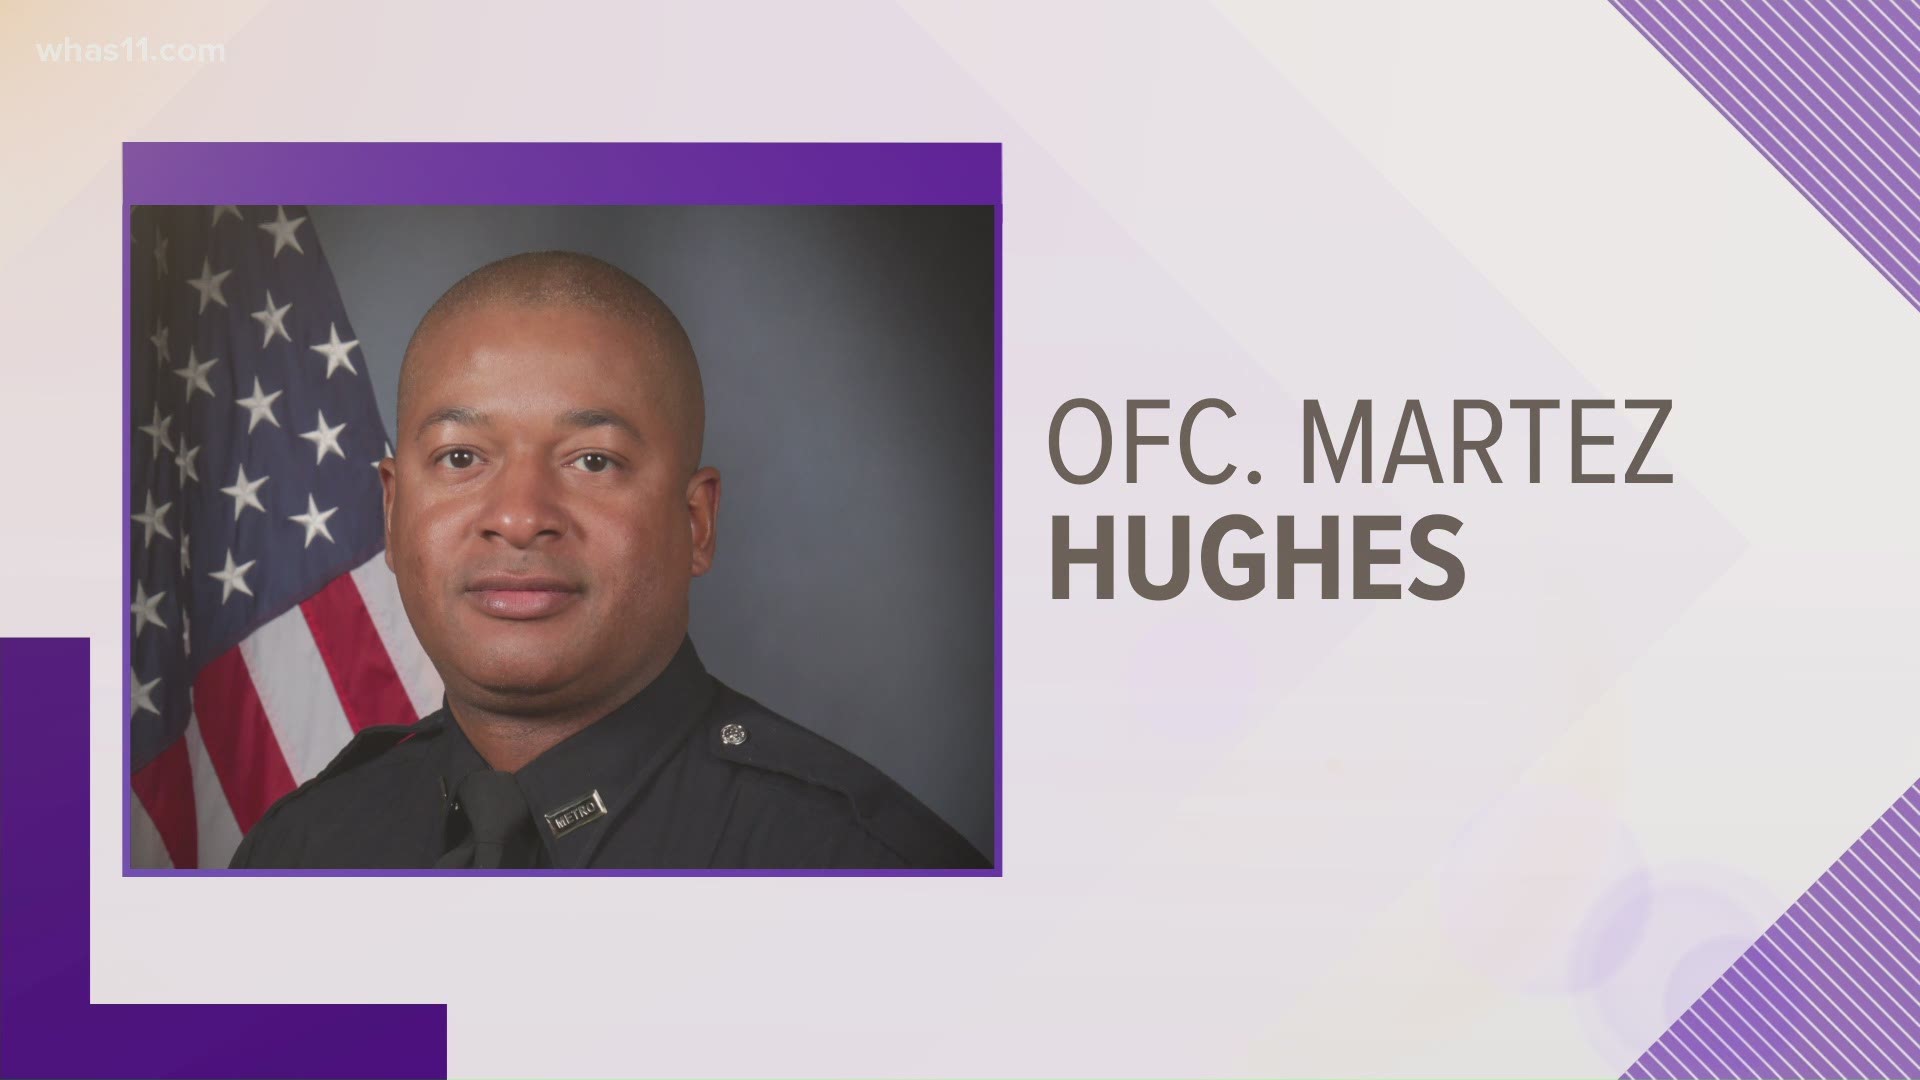 Officer Martez Hughes, 49, was playing tennis in Chickasaw Park when he suffered an "acute medical condition."